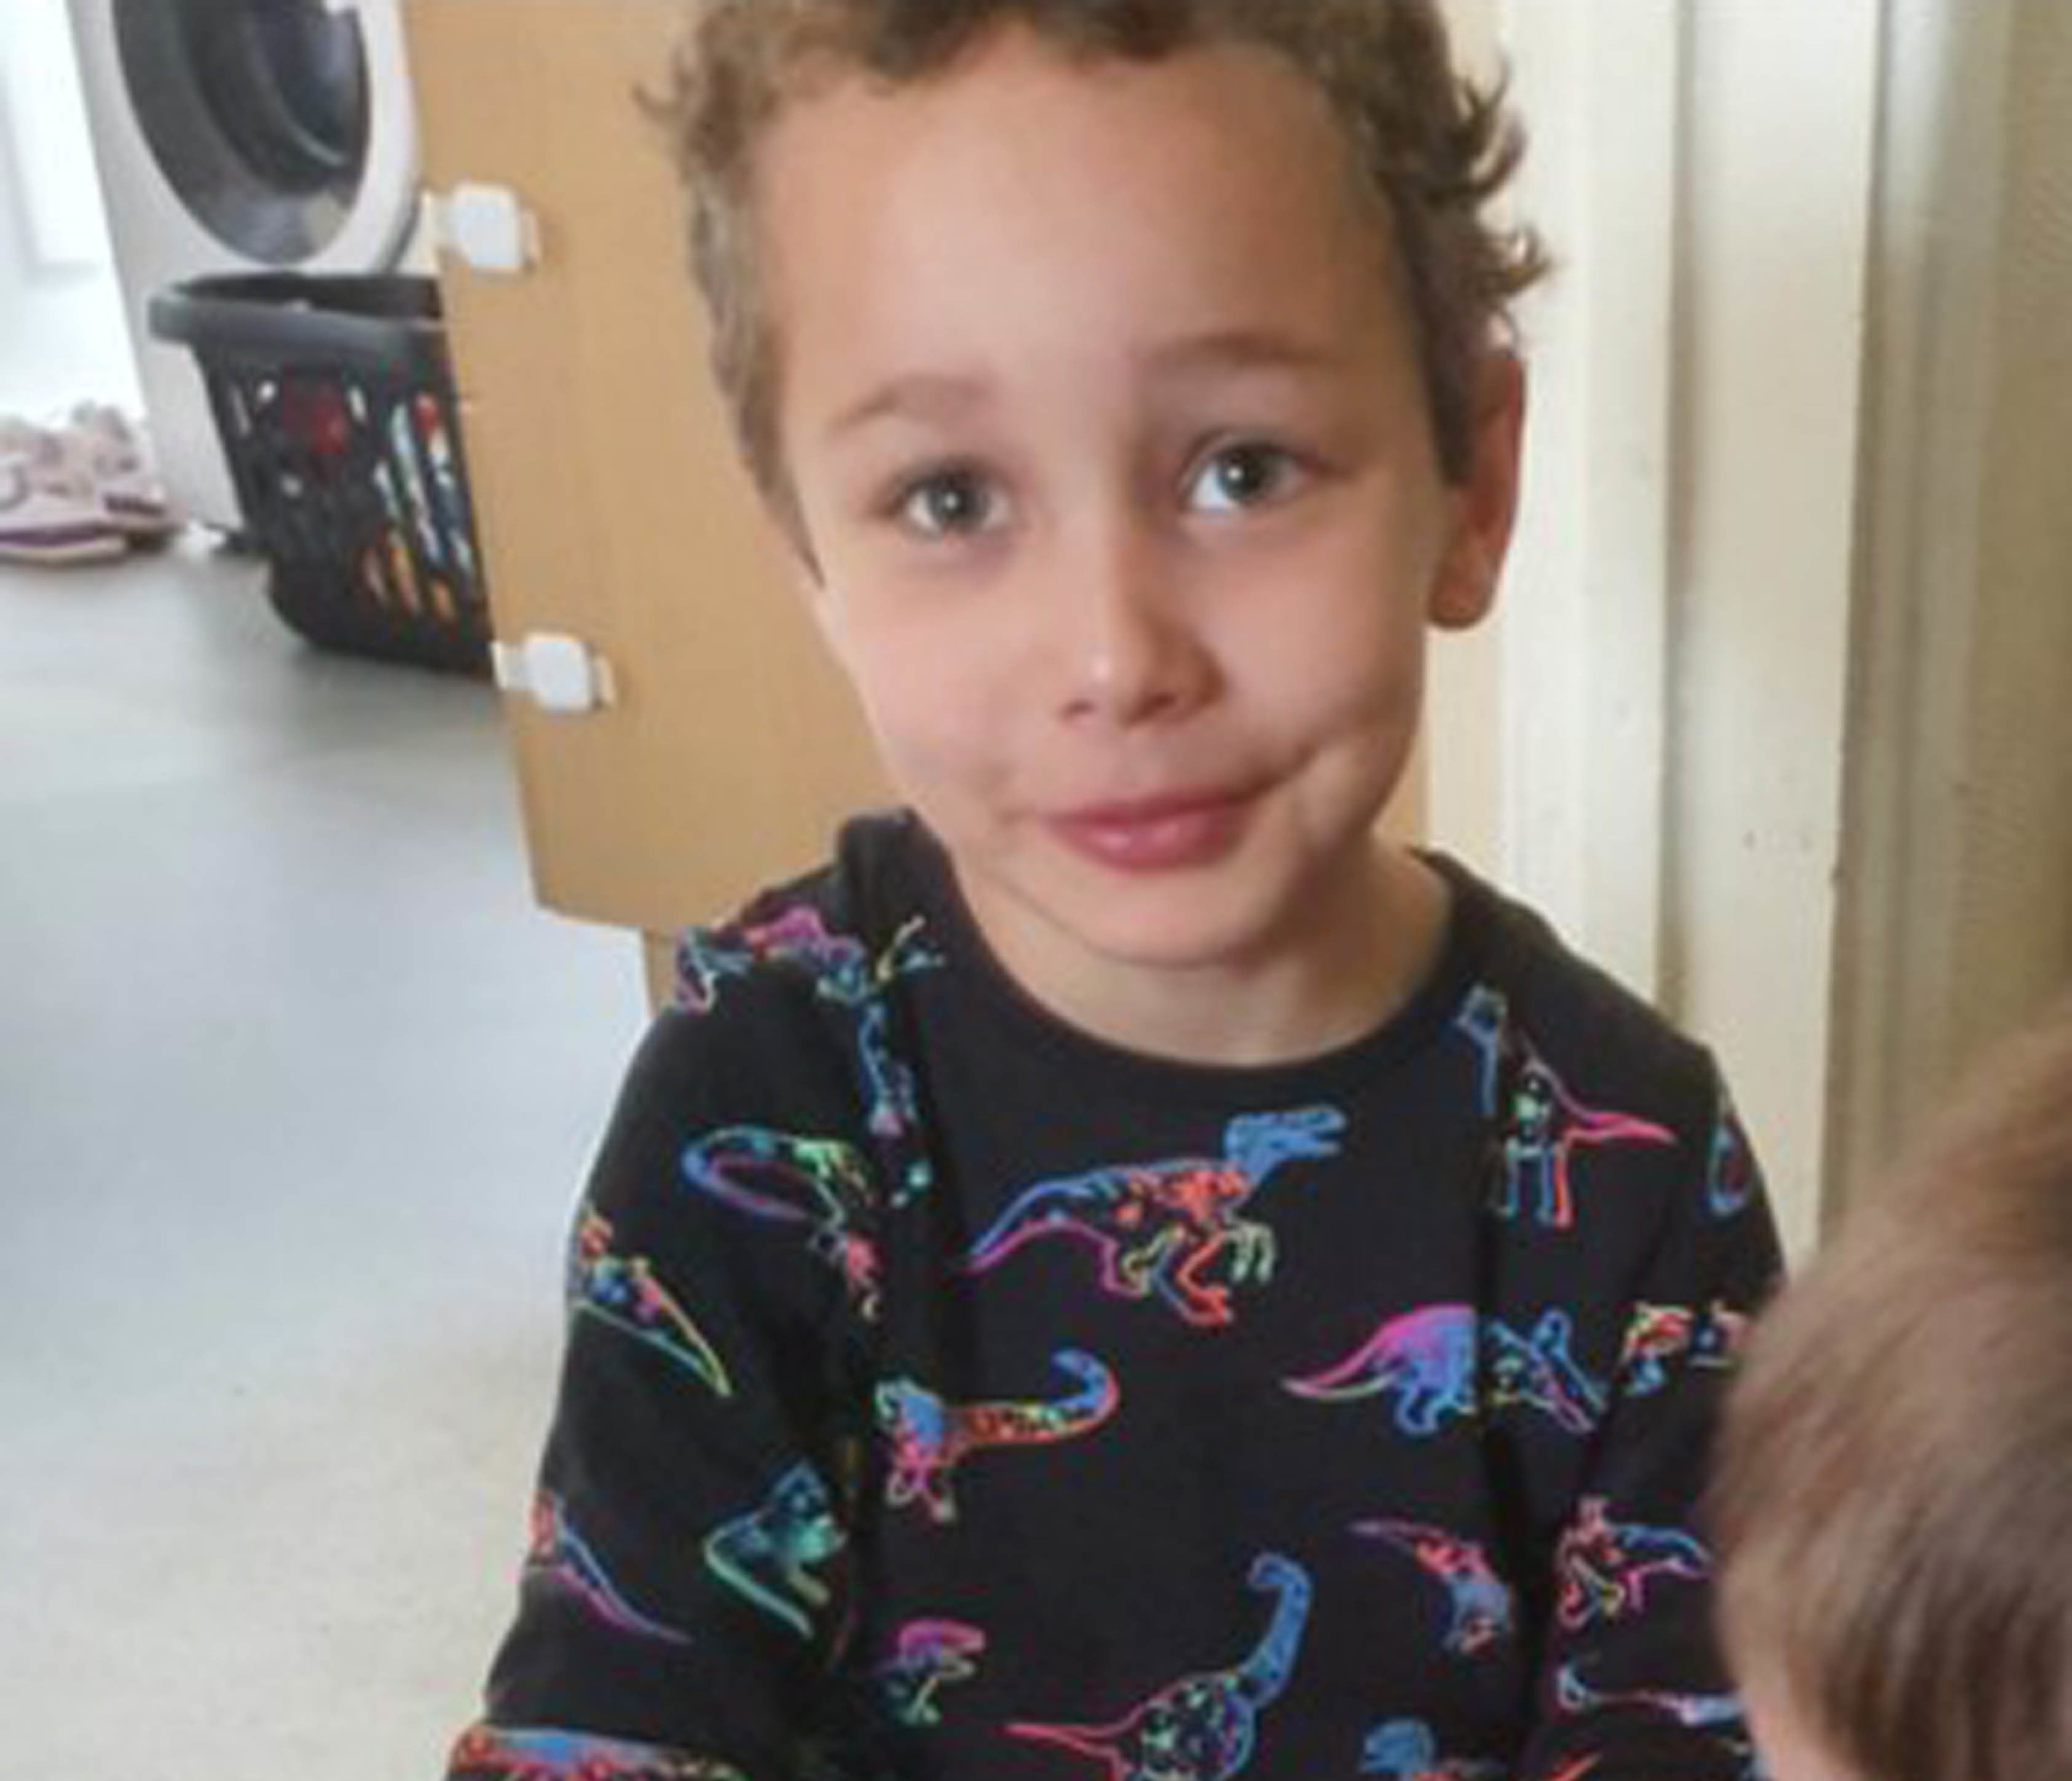 The body of five-year-old Logan Mwangi was found in the River Ogmore in Pandy Park, Bridgend